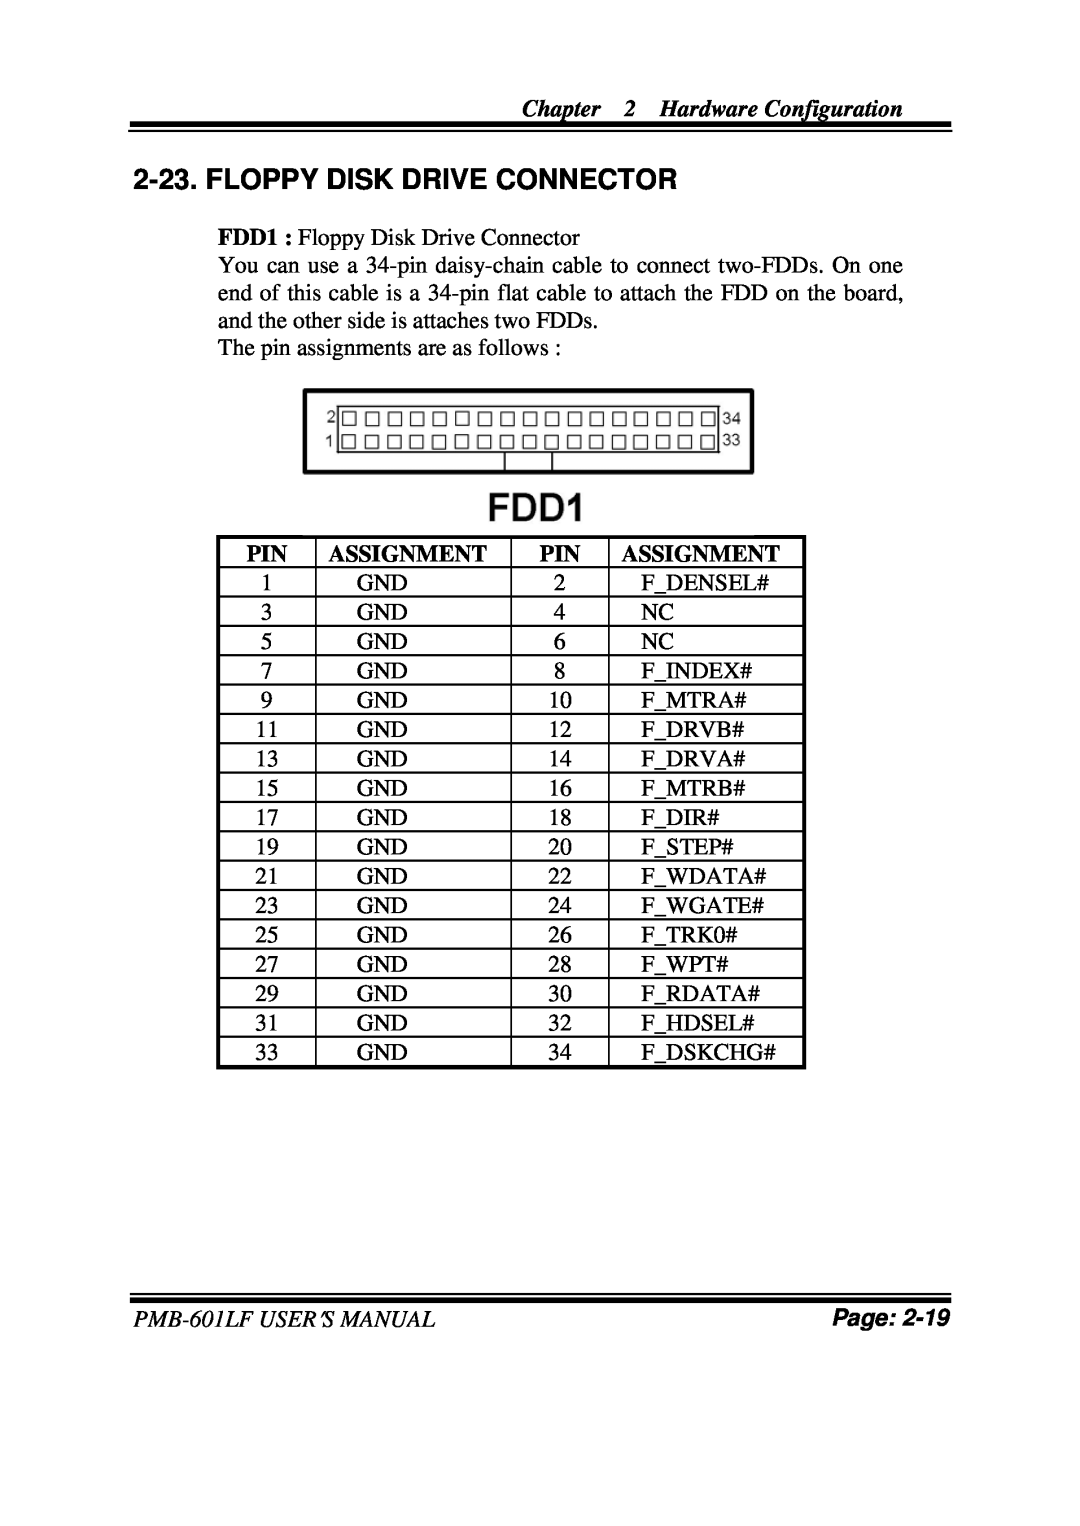 Intel user manual Floppy Disk Drive Connector, Hardware Configuration, Assignment, PMB-601LFUSER′S MANUAL, Page 